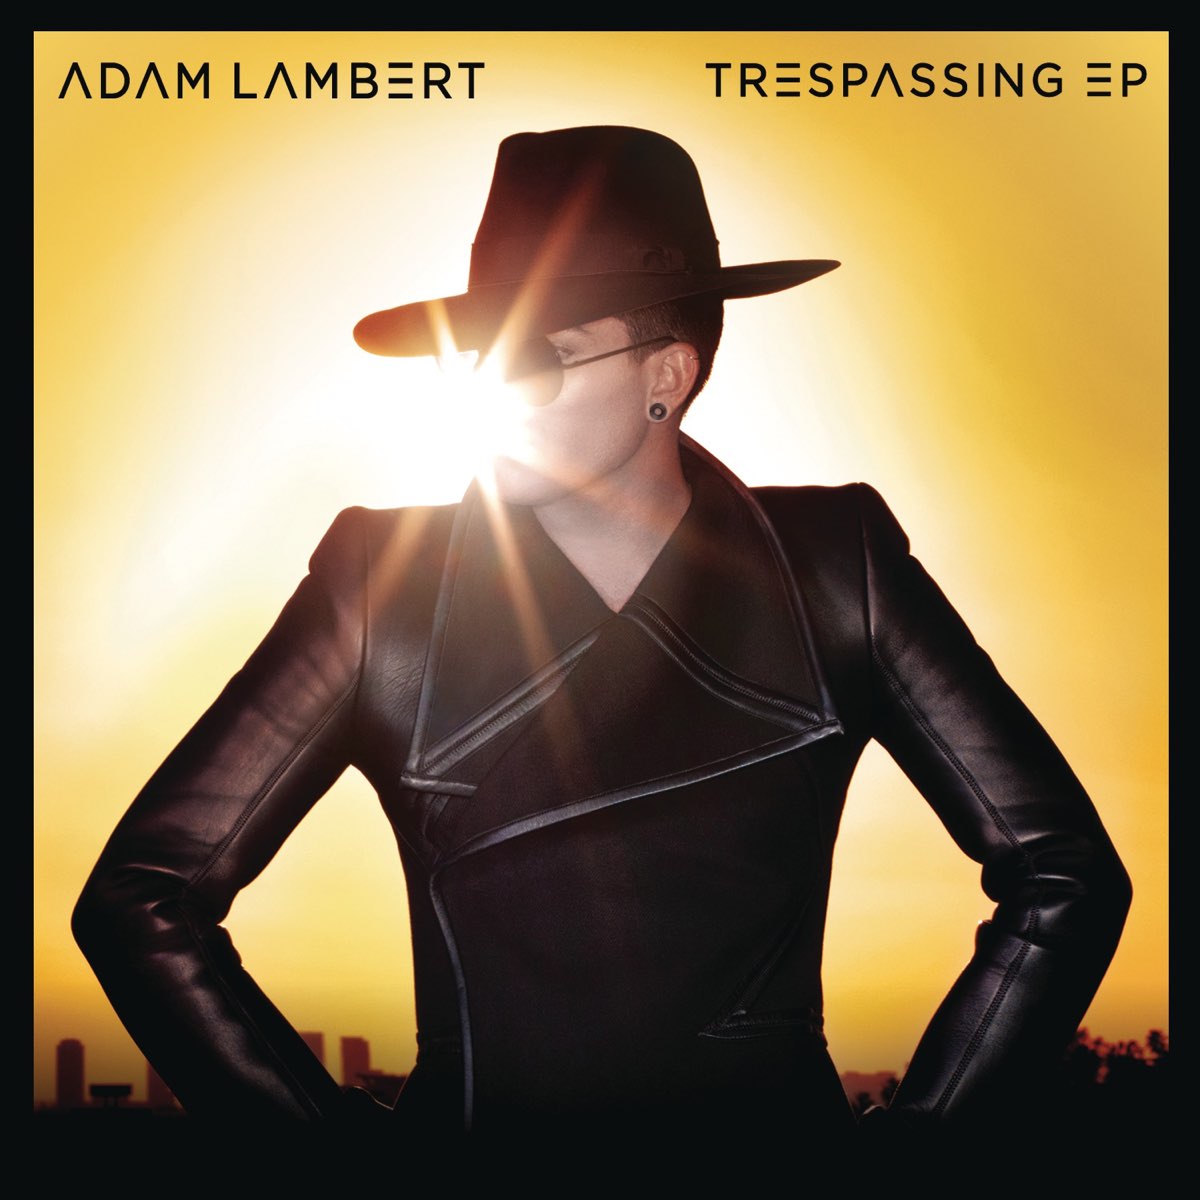 CONGRATS @adamlambert🚧❗️🪩 🤘🏽Still love the 'Trespassing' Promo Remixes🔥🎧we A&R'd for this single by WAWA feat. @CAZWELLnyc & @Amanda_Lepore💄🛑 🔊soundcloud.com/peace-bisquit/…